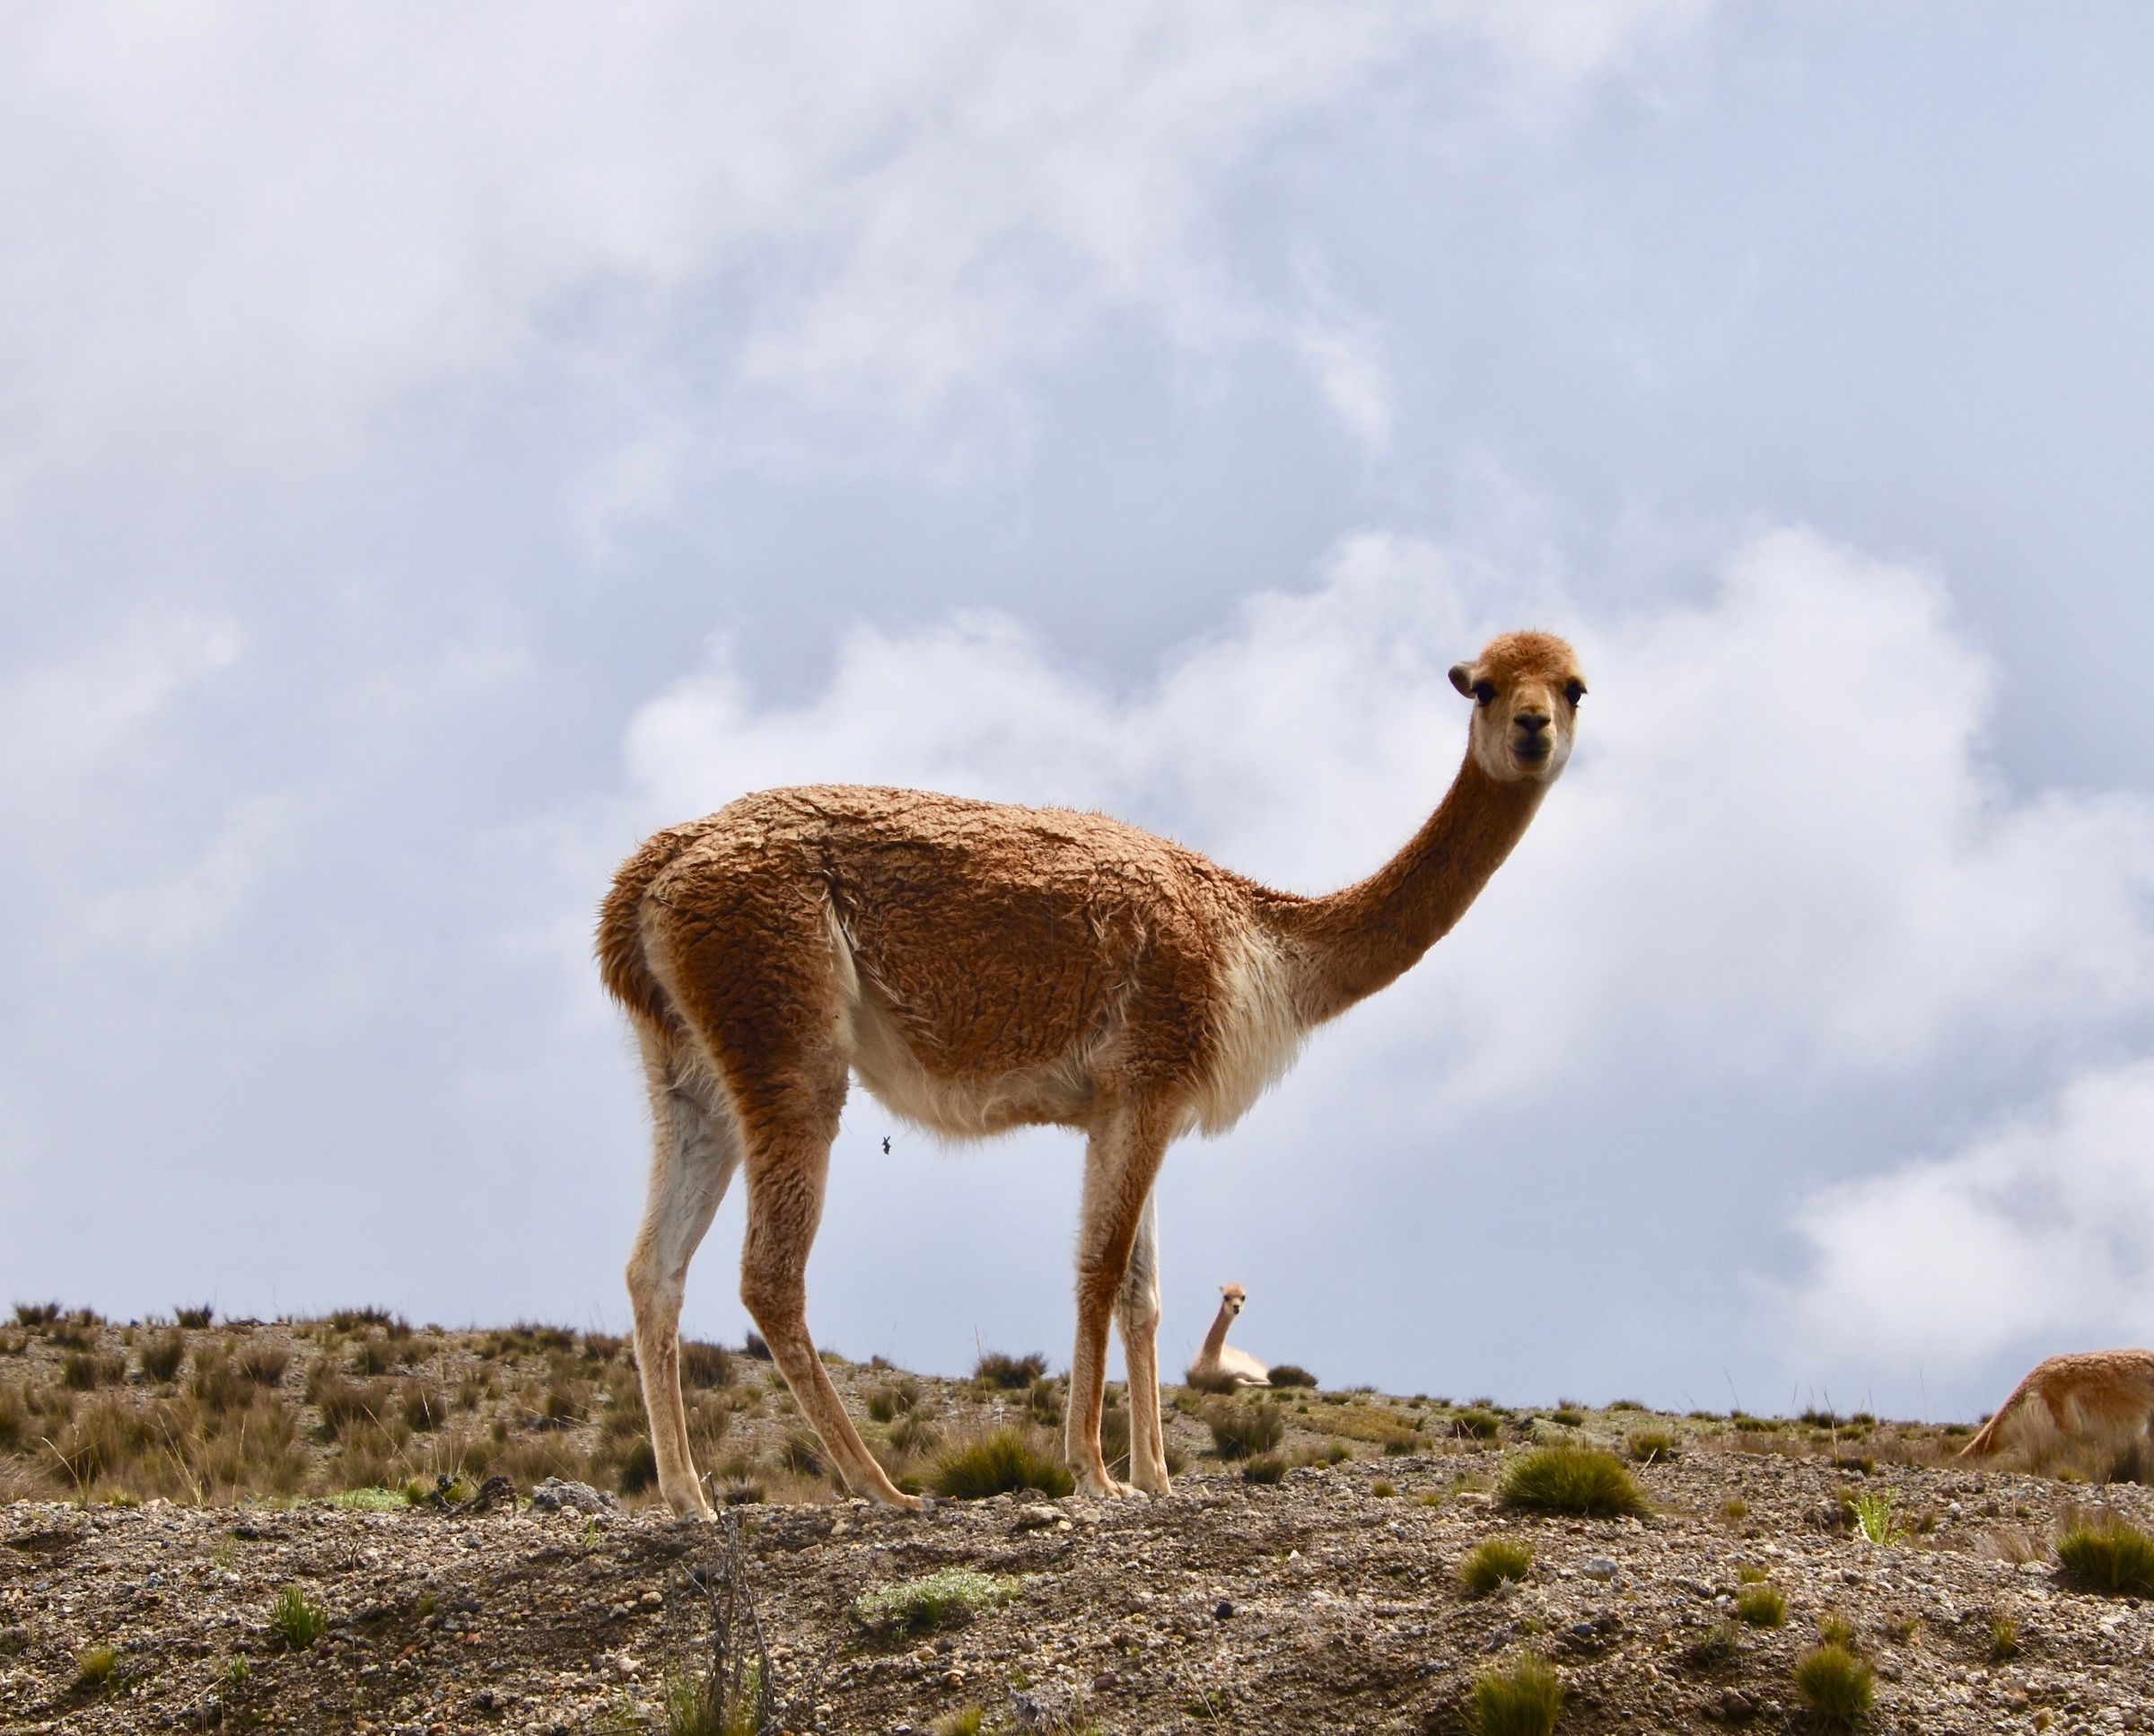 Vicuna in the Avenue of the Volcanoes